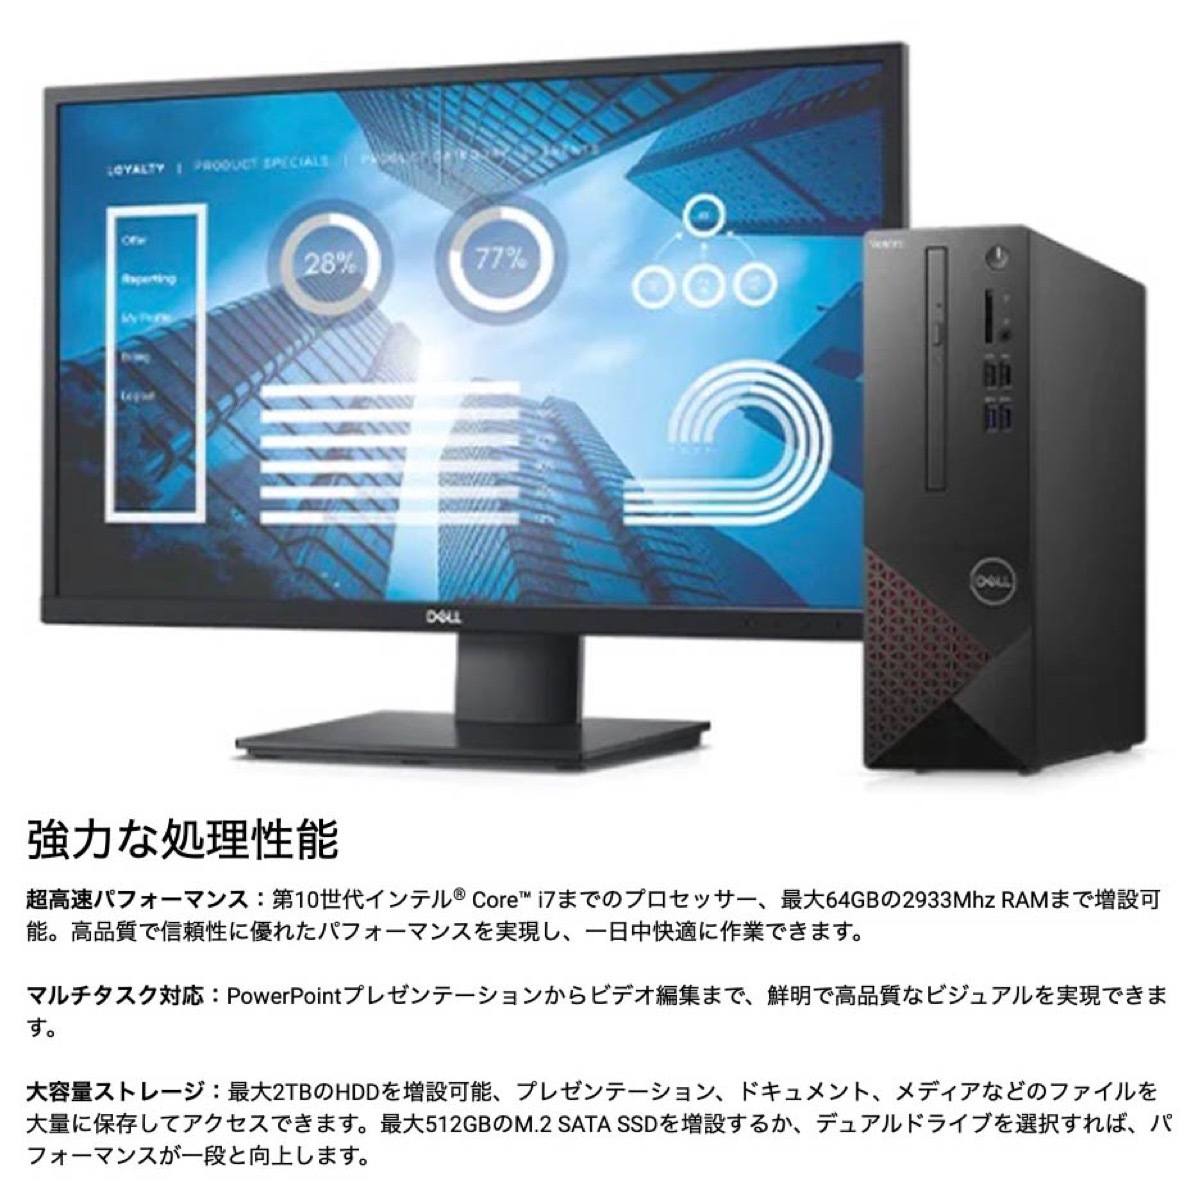 Dell Vostro3681 Win10 Intel Core I3 3 6ghz 物覚え4gb Hdd1tb バックグラウンド Pc マイクロコンピューター パウダーコンパクト 墨染め デル 10 Cannes Encheres Com